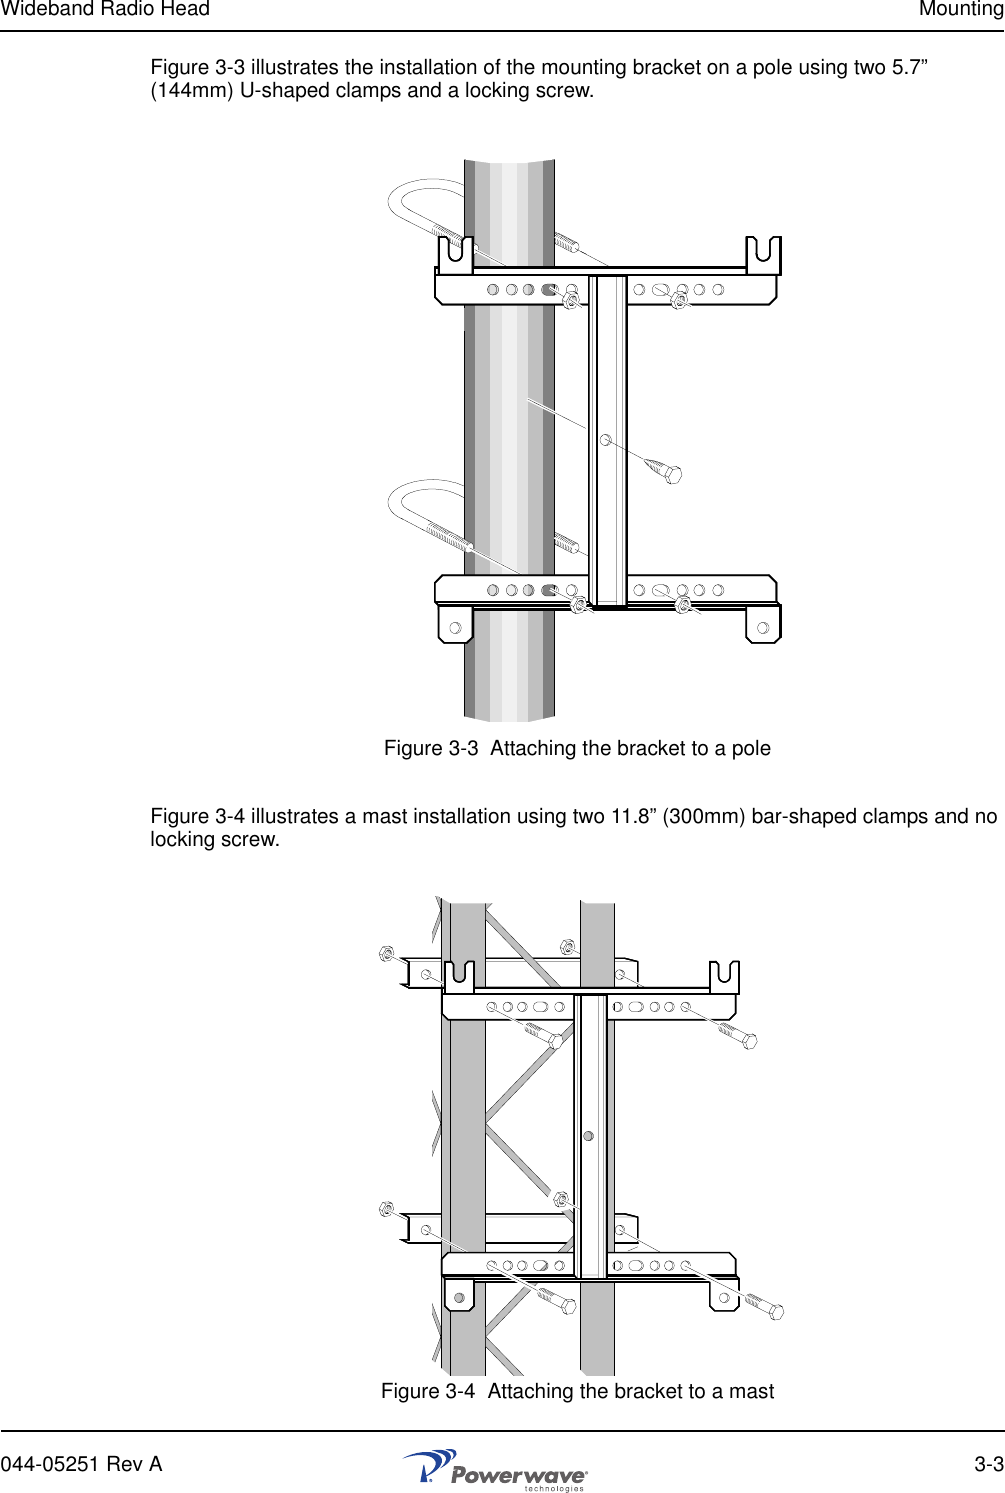 Wideband Radio Head Mounting044-05251 Rev A 3-3Figure 3-3 illustrates the installation of the mounting bracket on a pole using two 5.7” (144mm) U-shaped clamps and a locking screw.Figure 3-3  Attaching the bracket to a poleFigure 3-4 illustrates a mast installation using two 11.8” (300mm) bar-shaped clamps and no locking screw.Figure 3-4  Attaching the bracket to a mast